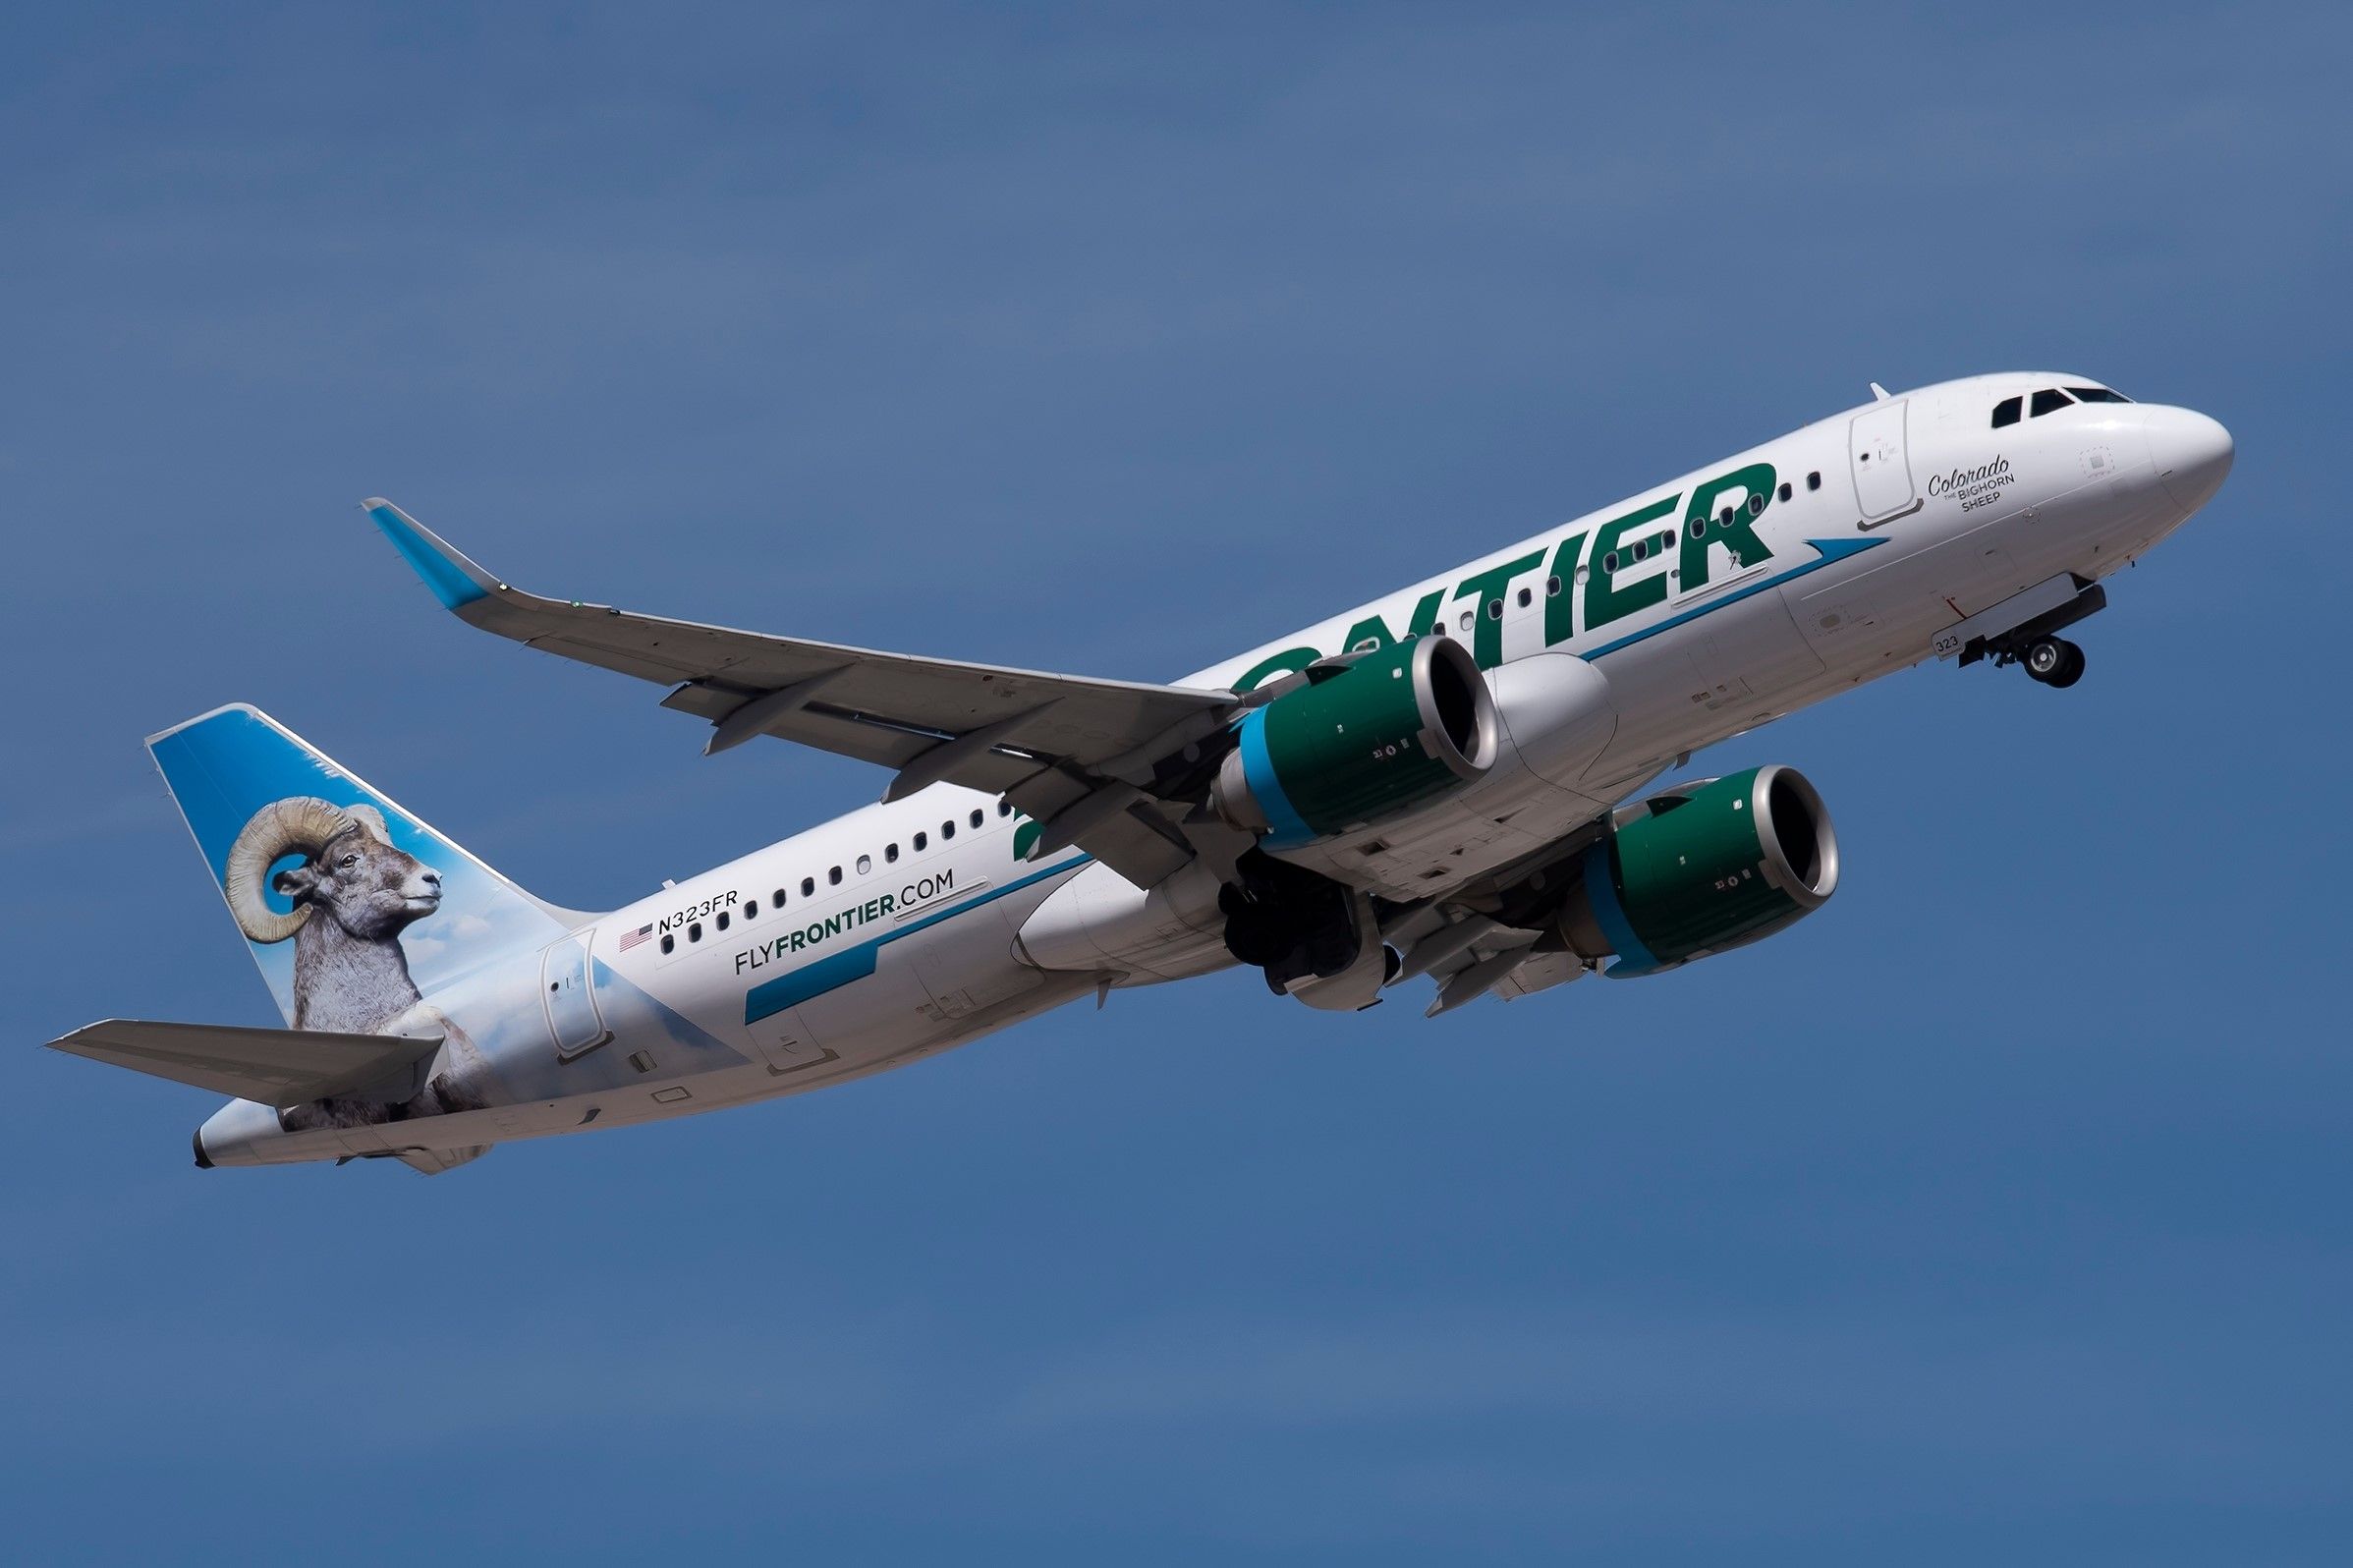 A Frontier Airlines Airbus A320neo Flying in the sky.